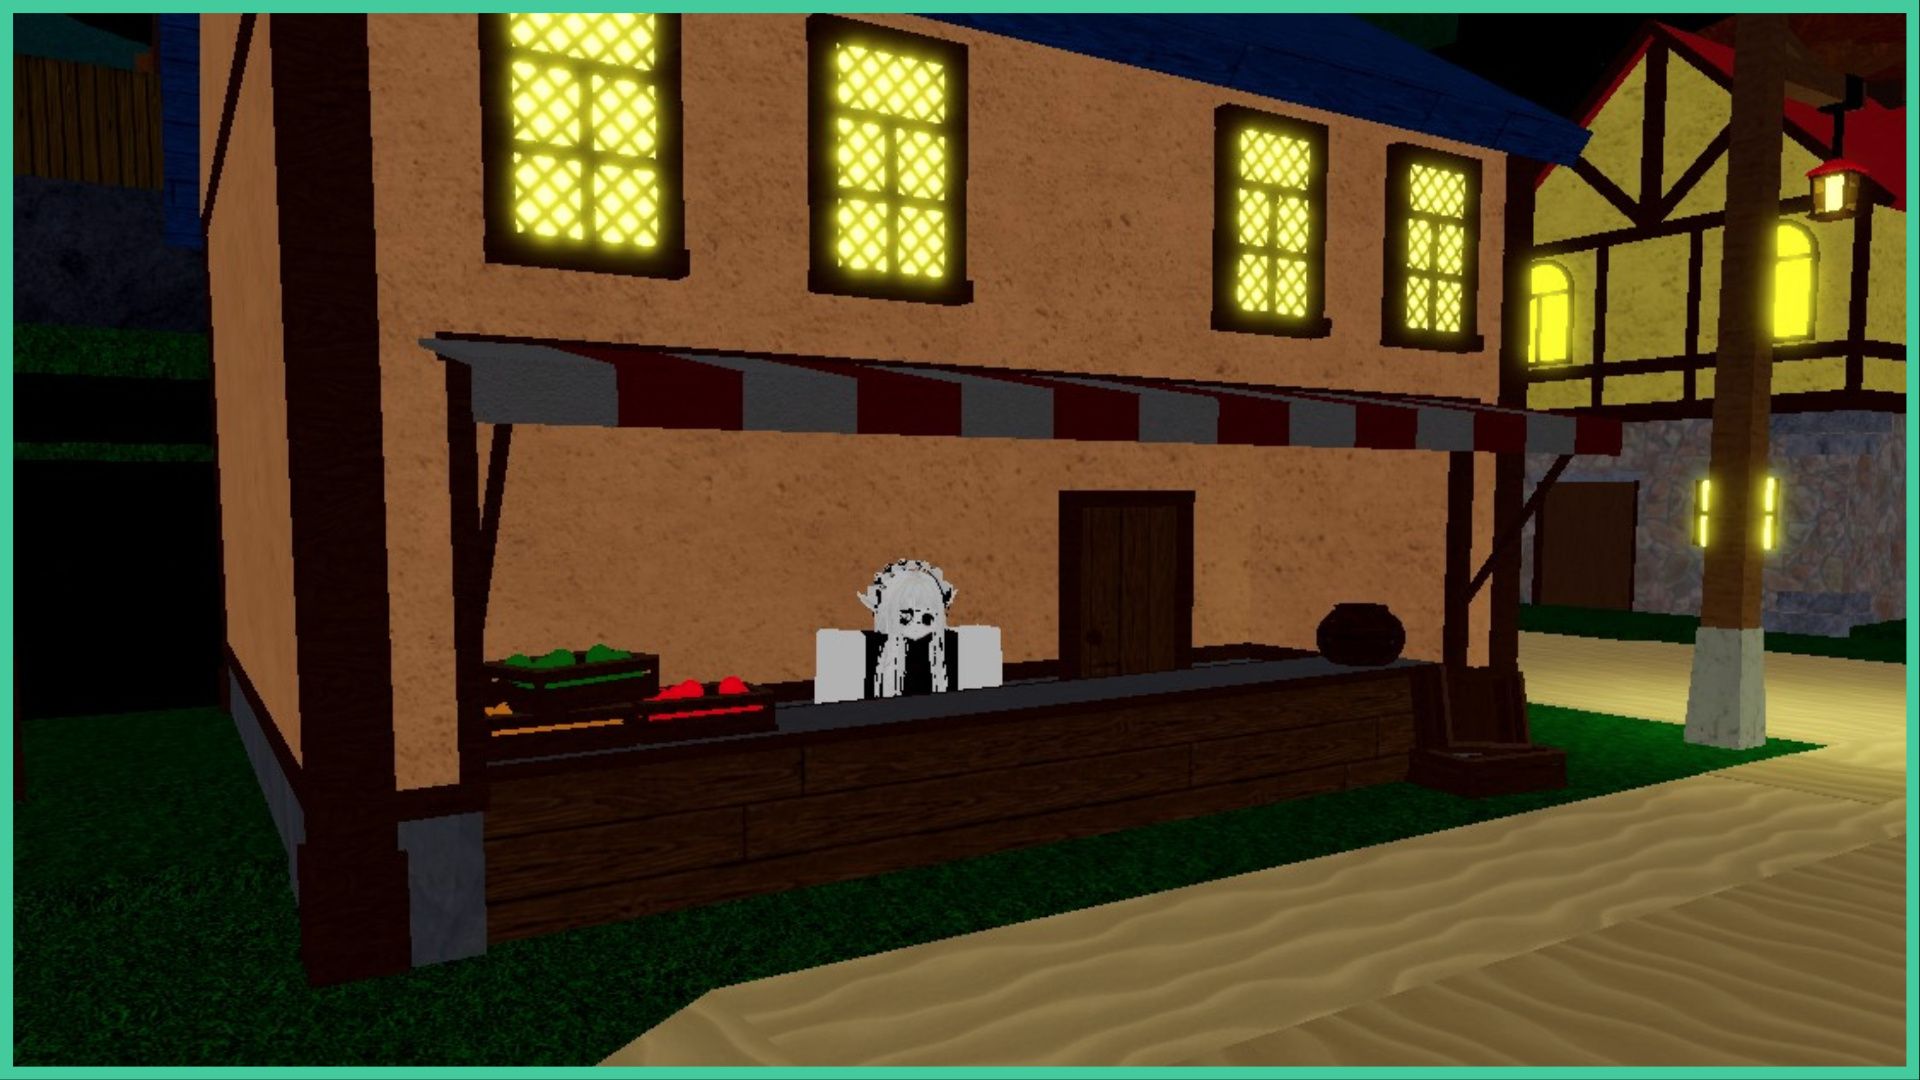 feature image for our anime spirits accessories guide, the image features a screenshot from the game of a roblox player standing behind a stall that has 3 baskets of fruit and vegetables with a striped canopy in front of a building with glowing windows